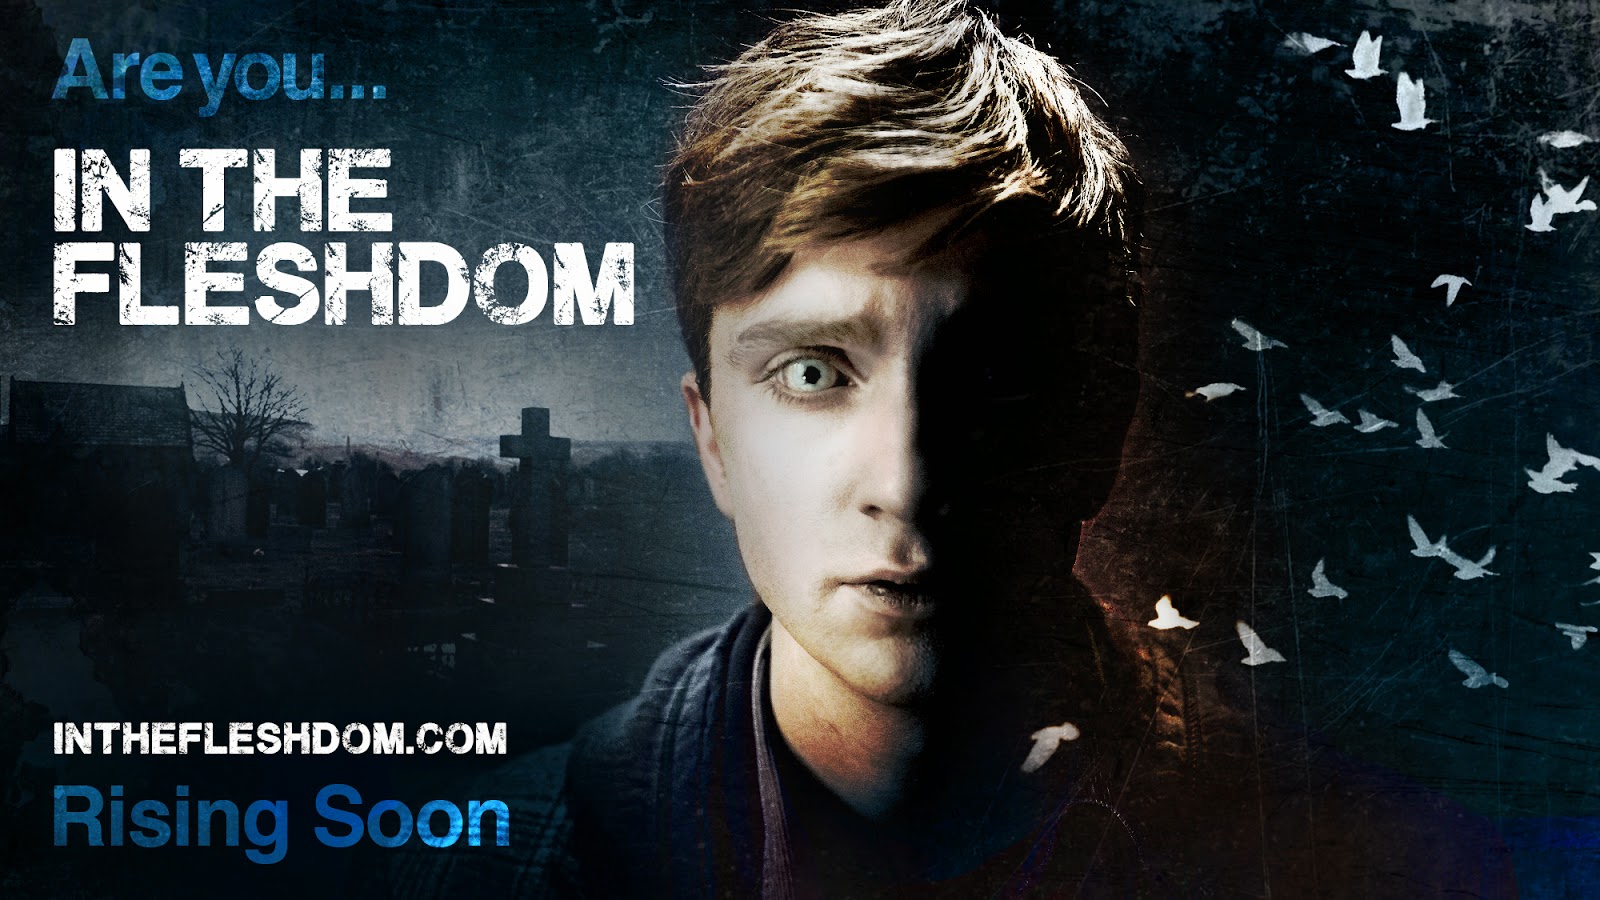 In the Flesh - Campaign to help renew the show for Season 3 #SaveInTheFlesh